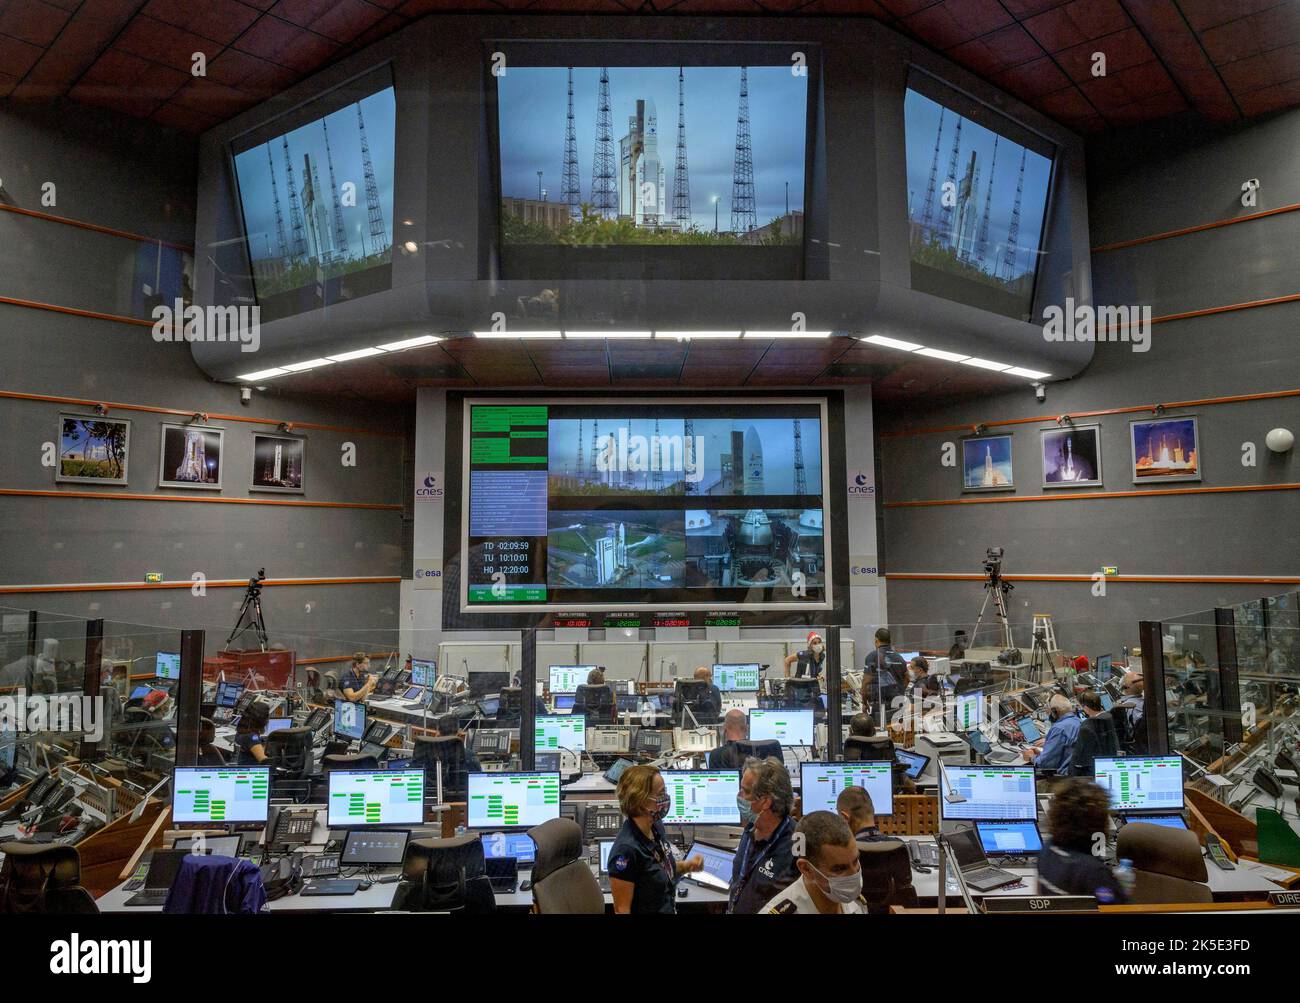 Launch teams monitor the countdown to the launch of the Ariane 5 rocket carrying the James Webb Space Telescope, 25 December 2021, in the Jupiter Center at the Guiana Space Center in Kourou, French Guiana. The James Webb Space Telescope (sometimes called JWST or Webb) is a large infrared telescope with a 21.3 foot (6.5 meter) primary mirror. The observatory will study every phase of cosmic history - from within our solar system to the most distant observable galaxies in the early universe. Image by senior NASA photographer Bill Ingalls / Credit B.Ingalls/NASA. Editorial Use only Stock Photo